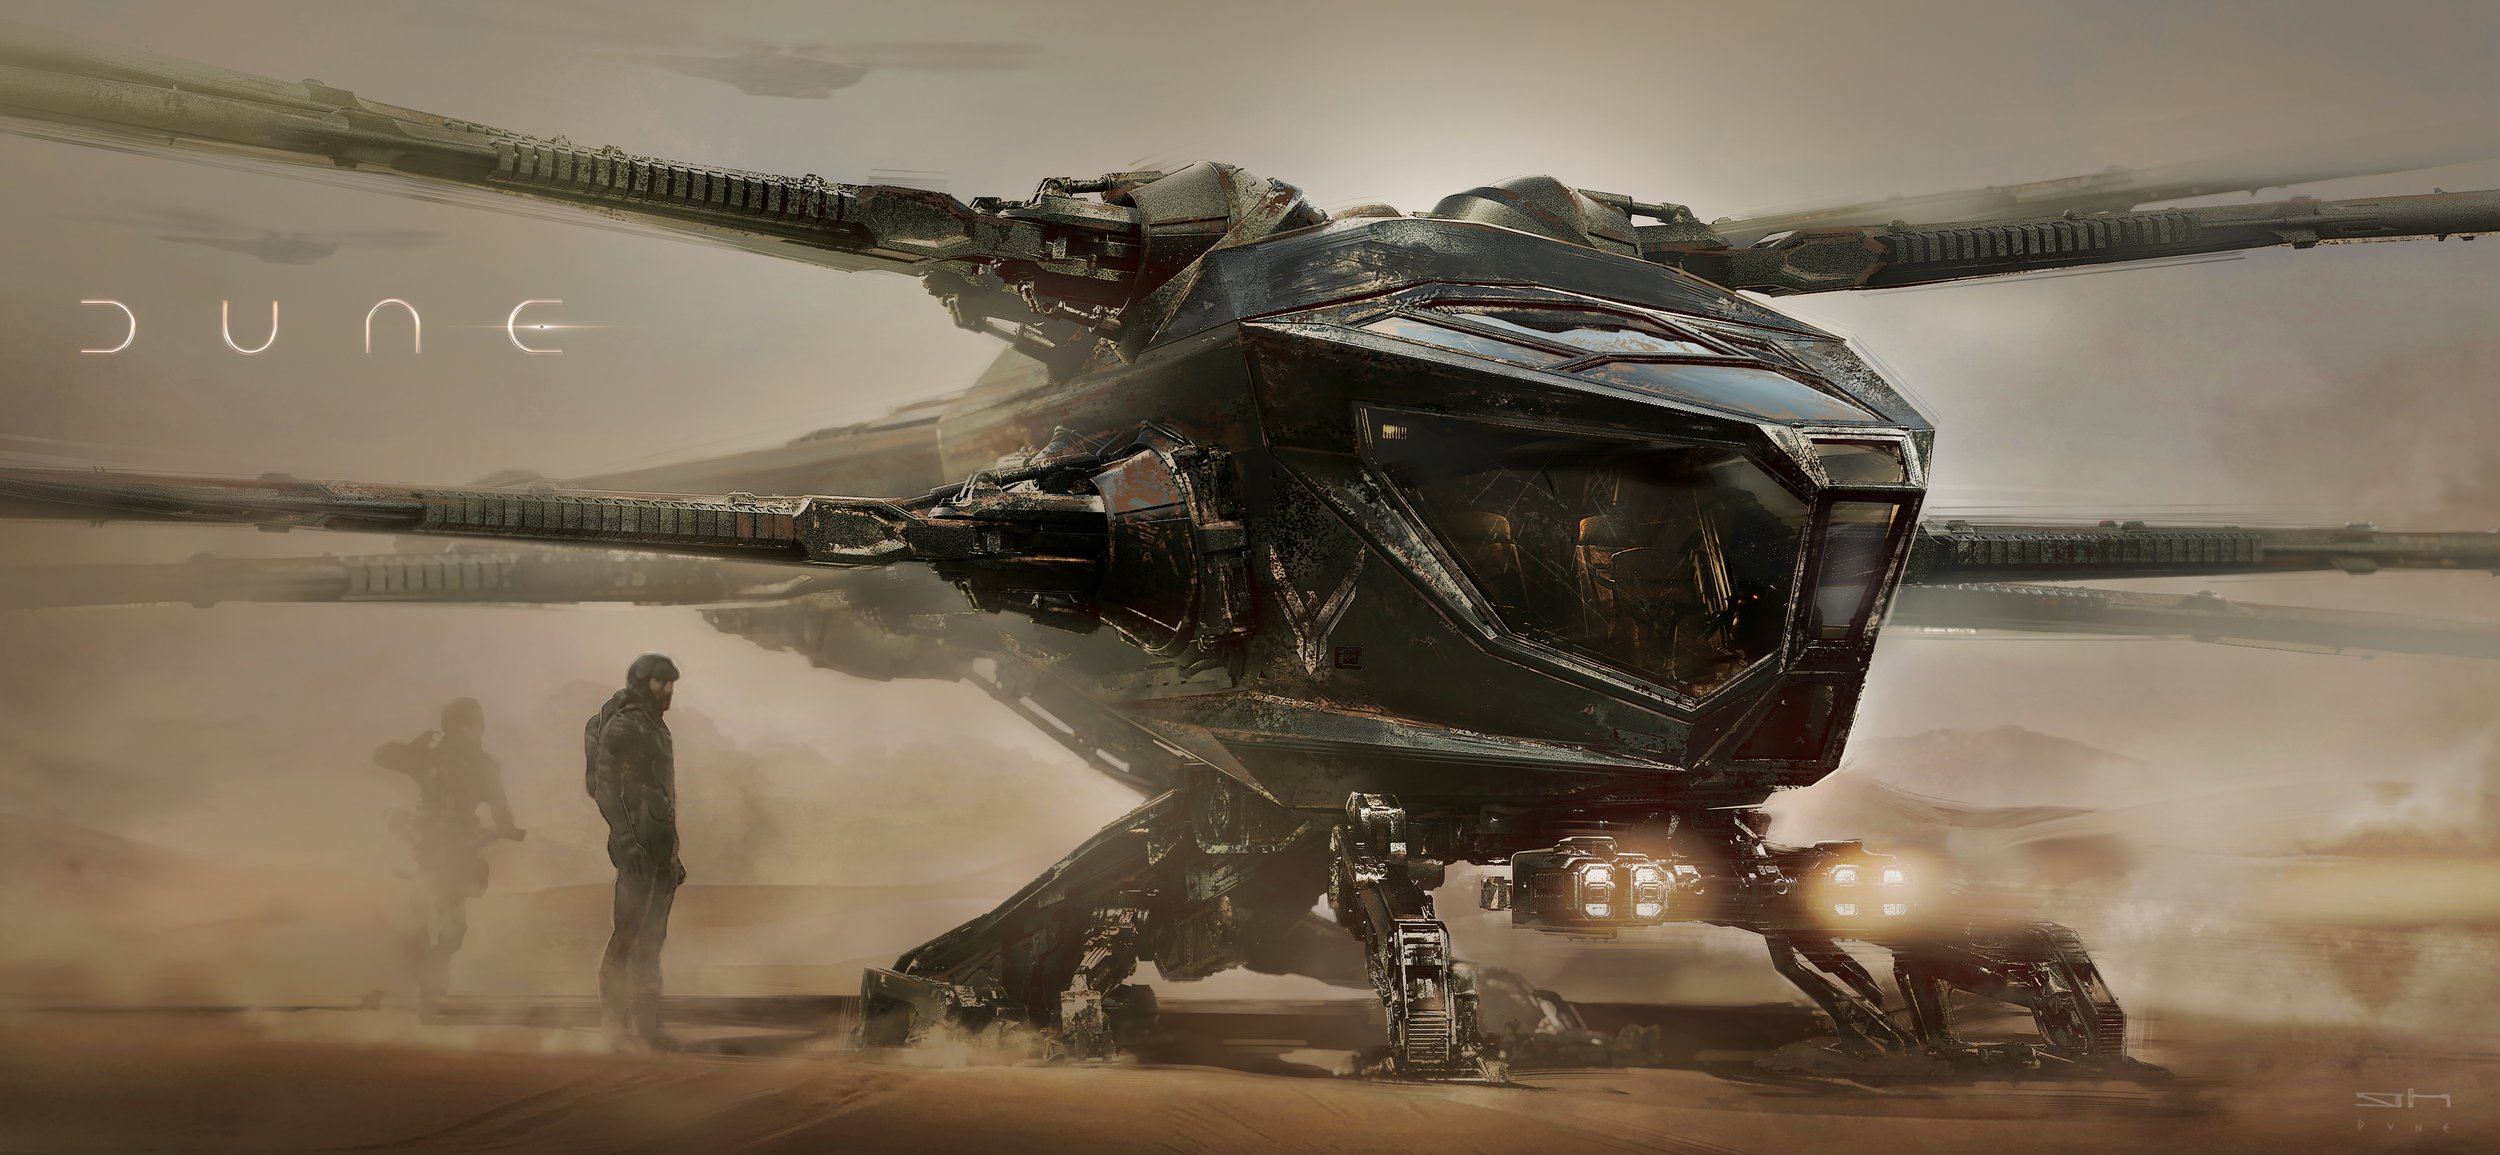 General 2500x1155 George Hull Dune (movie) ornithopter desert digital art concept art flying machine wings science fiction